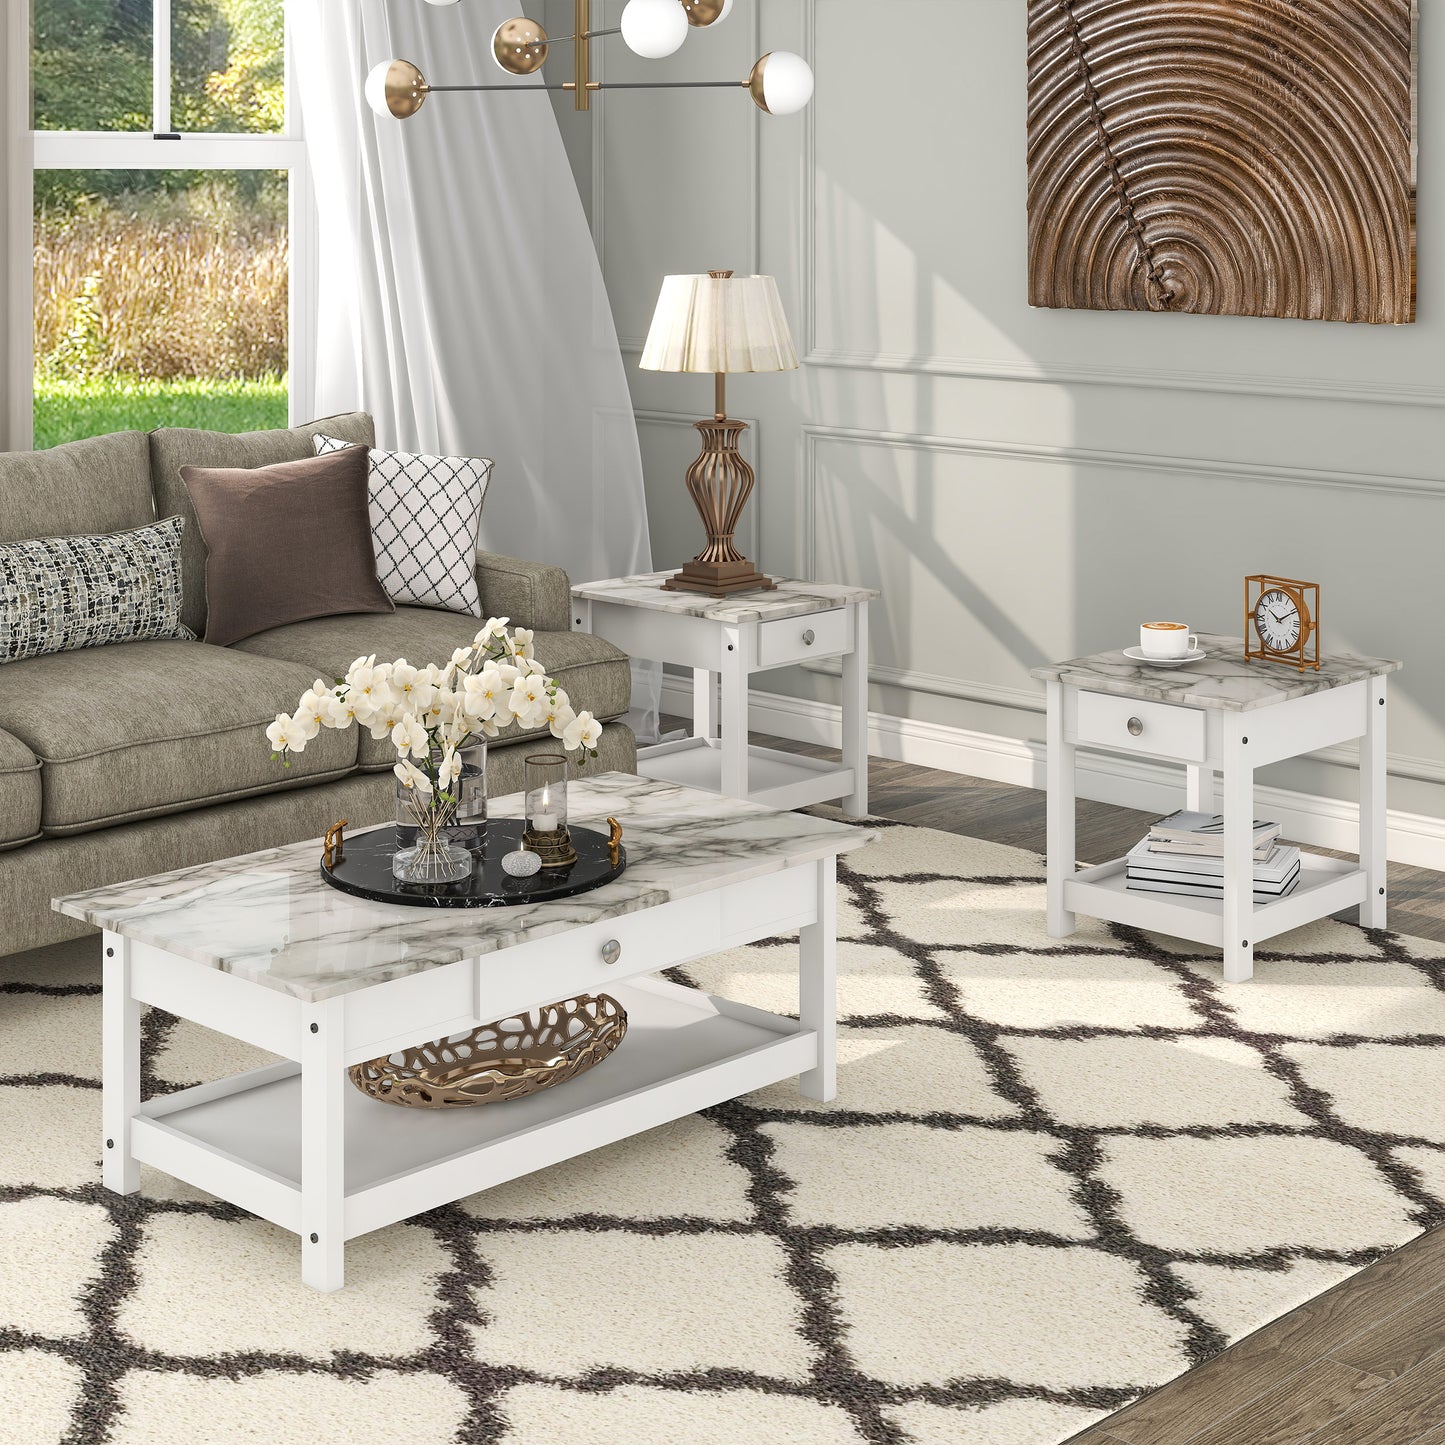 Right angled three-piece modern white and faux marble coffee table set with lower shelves in a living area with accessories